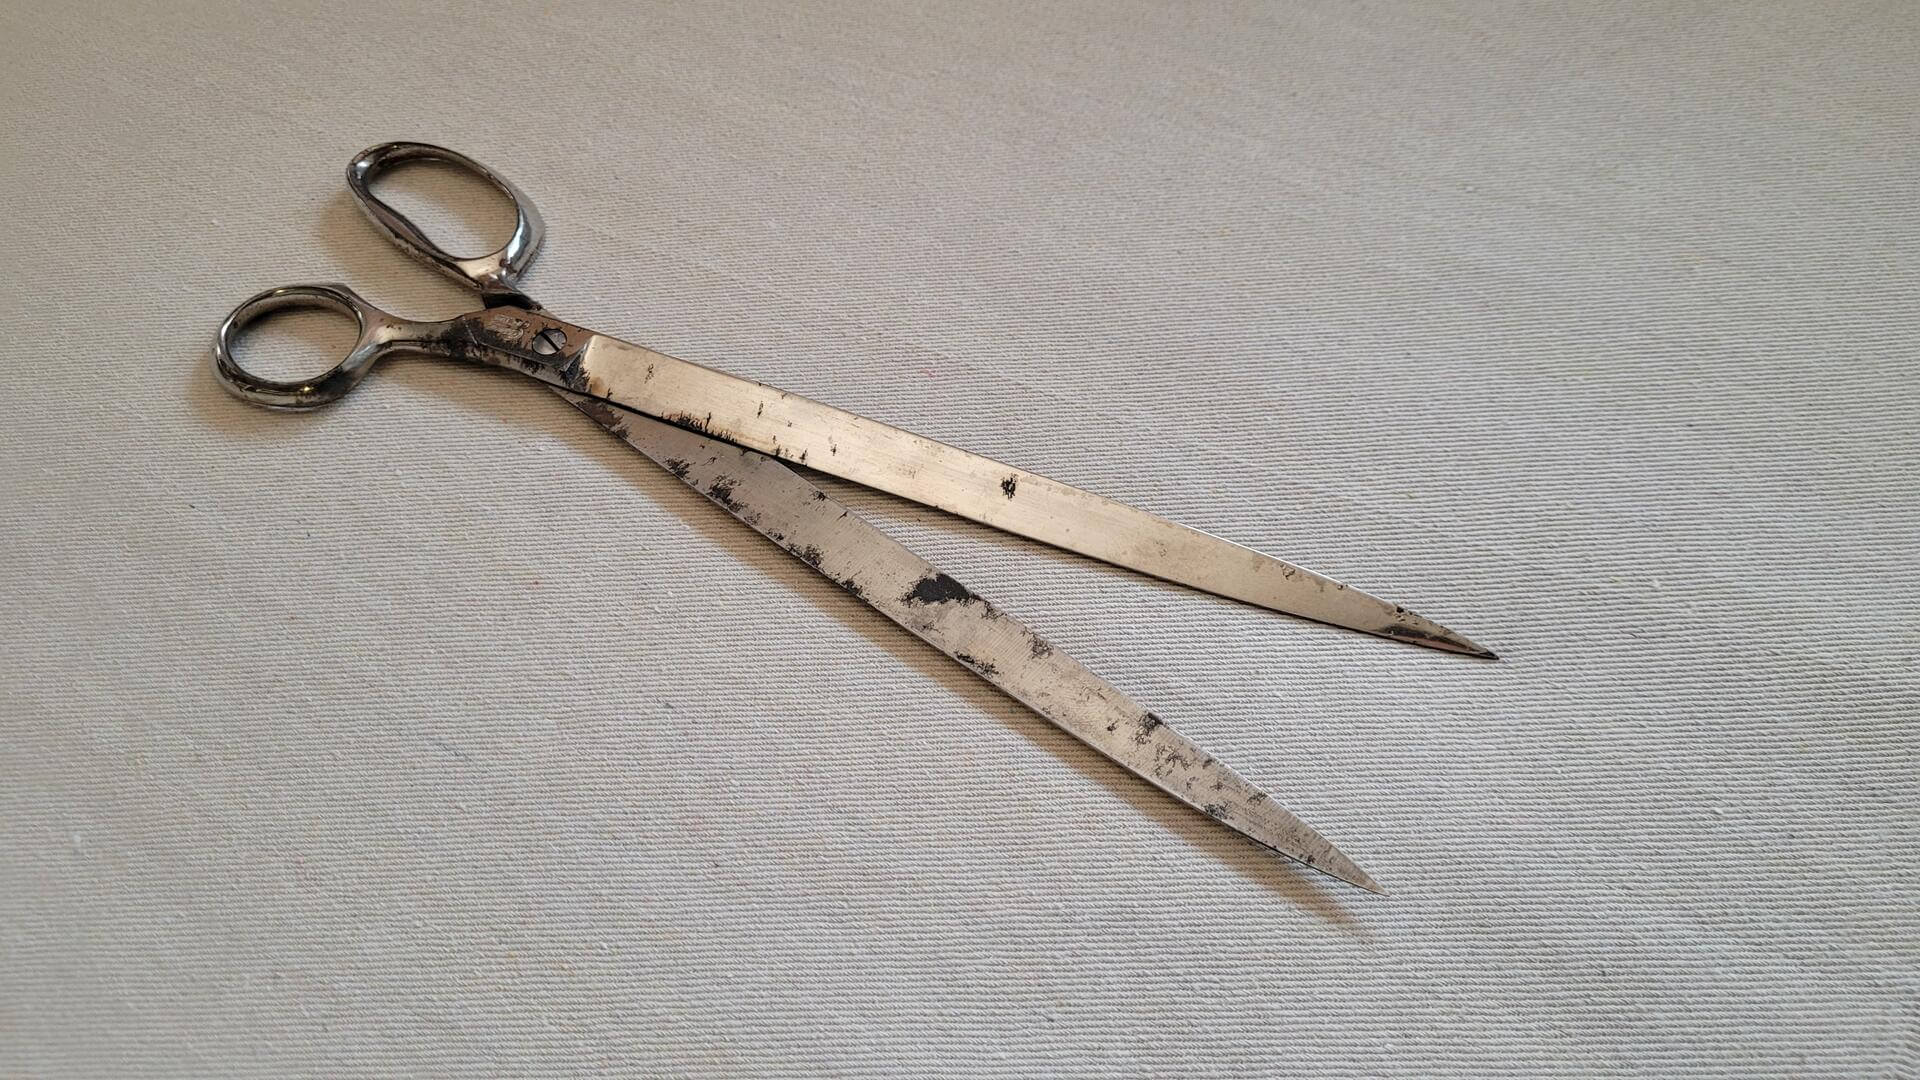 Nice vintage pair of Premier Lifetime Scissors 12.5 inches long. Antique made in Germany collectible tailor and dressmaker fabric cutting tools and shears